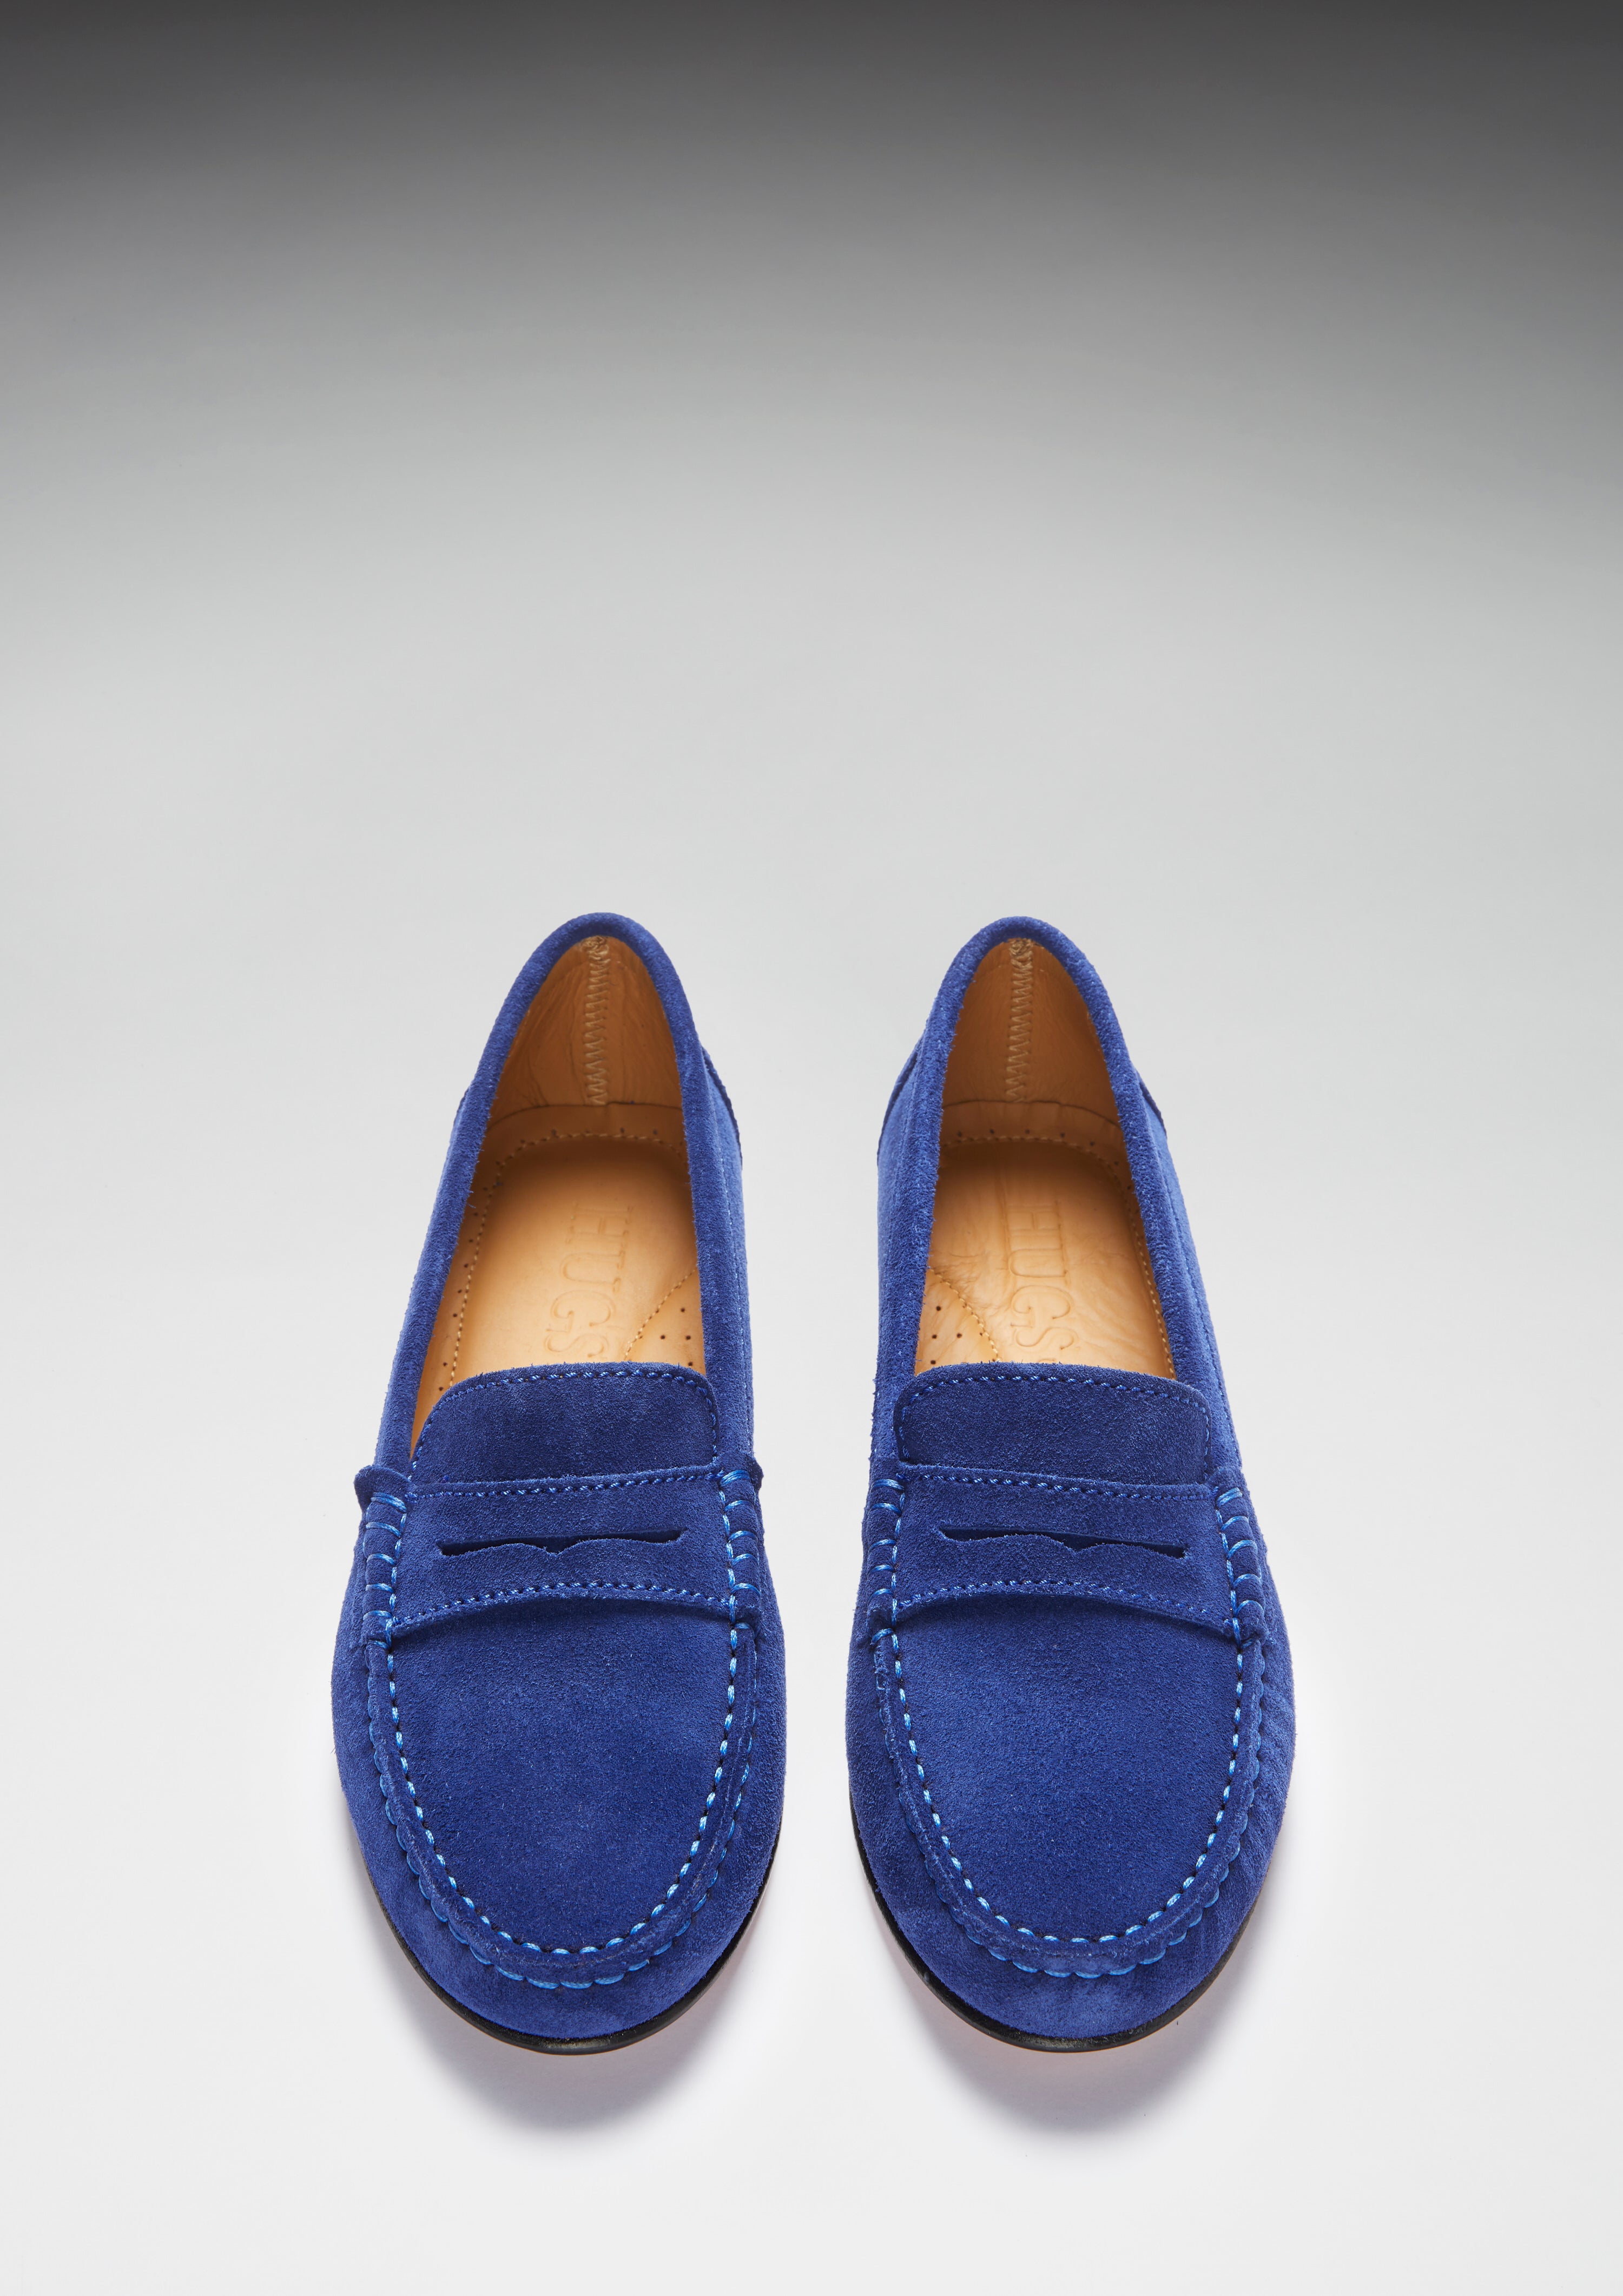 Women's Penny Loafers Leather Sole, ink blue suede - Hugs & Co.